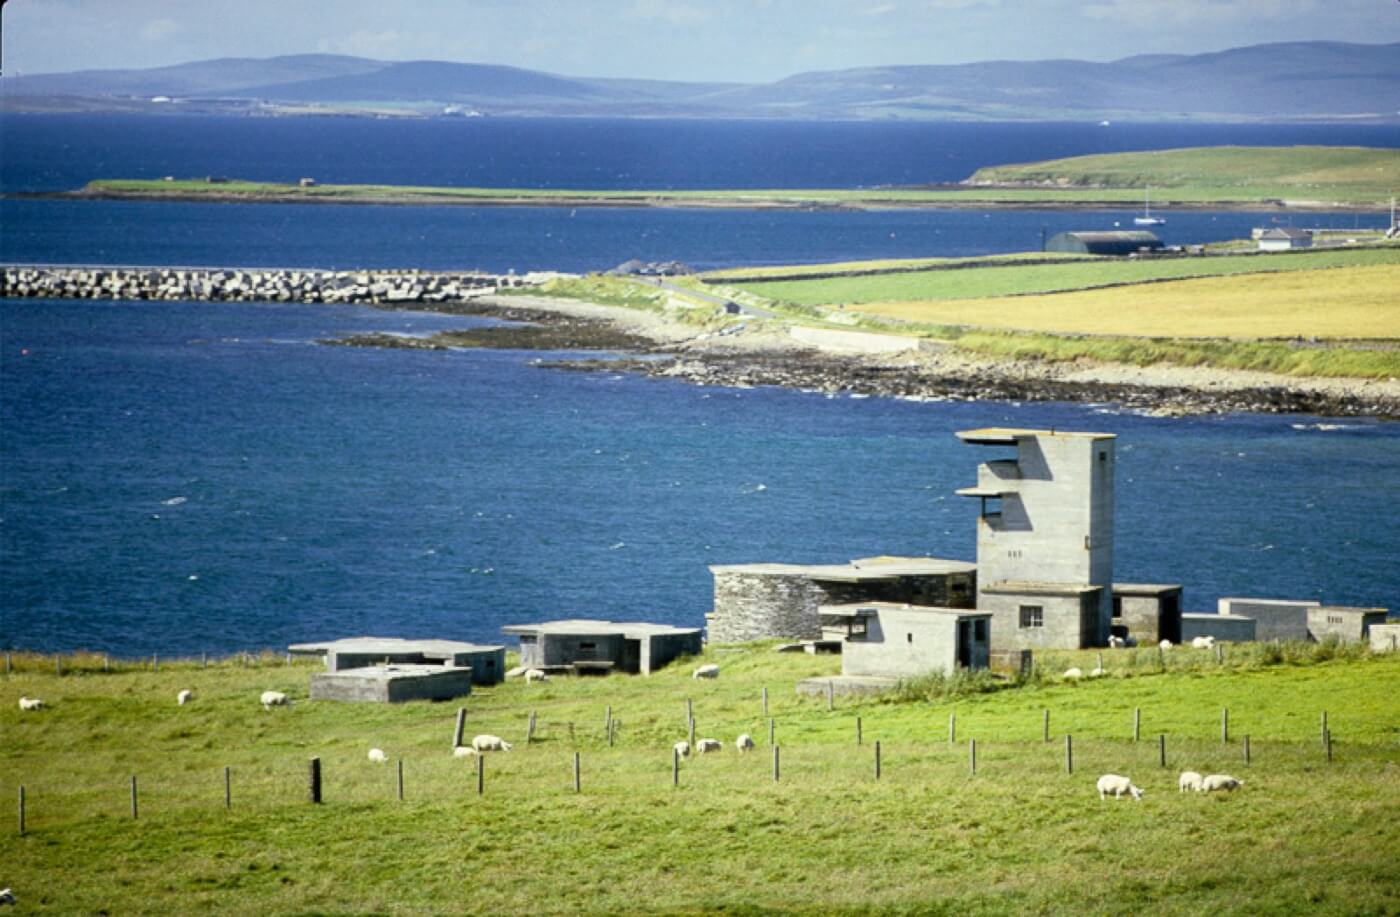 Graemeshall Coastal Defence Battery - photo by Charles Tait